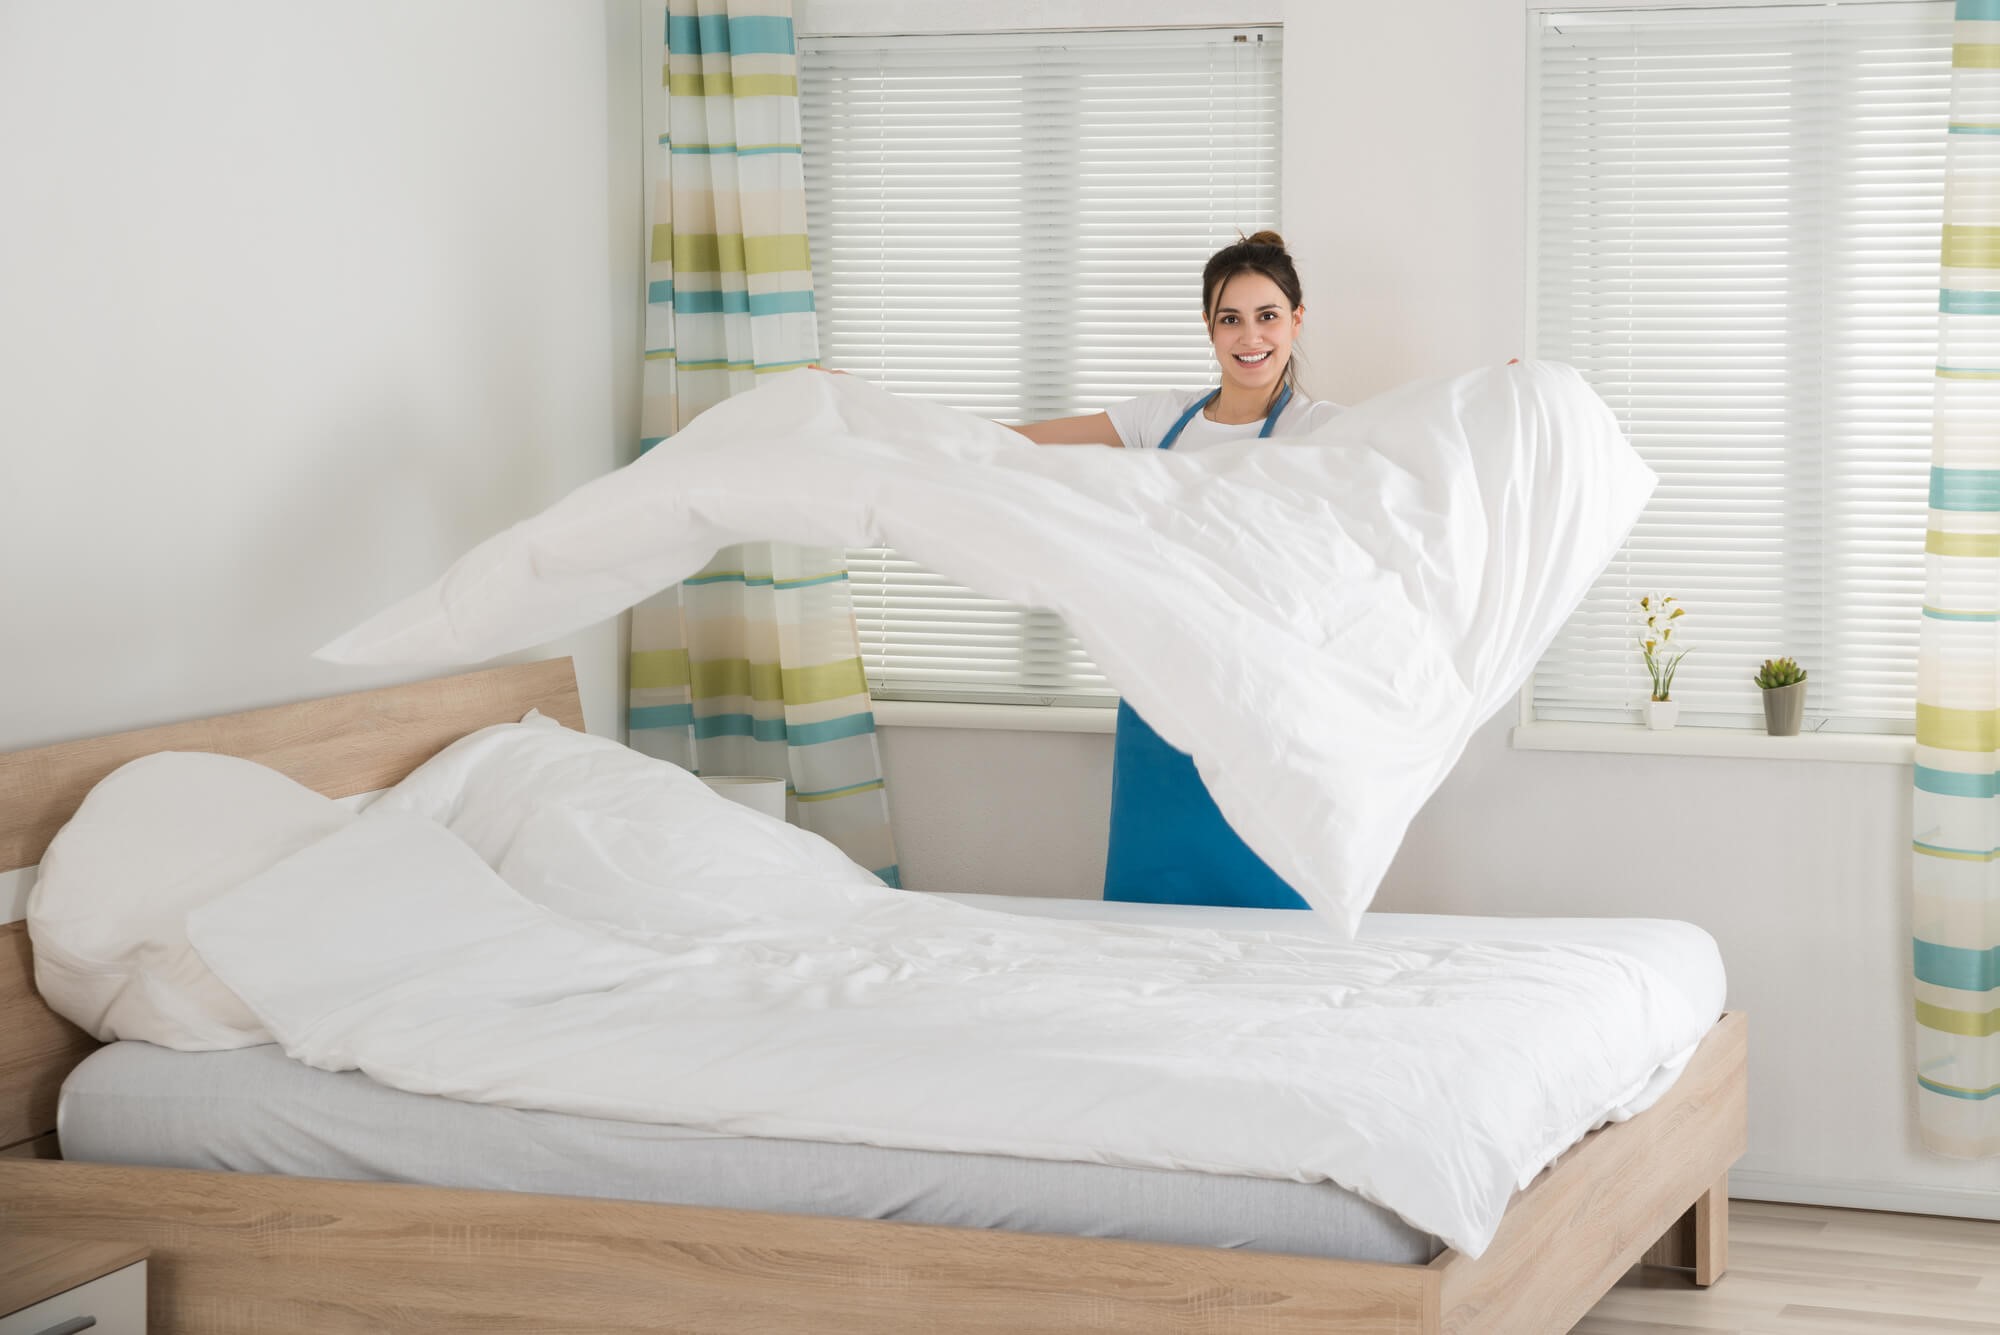 How to Get Pee Out of a Mattress: 6 Easy Steps to Remove Urine Smell